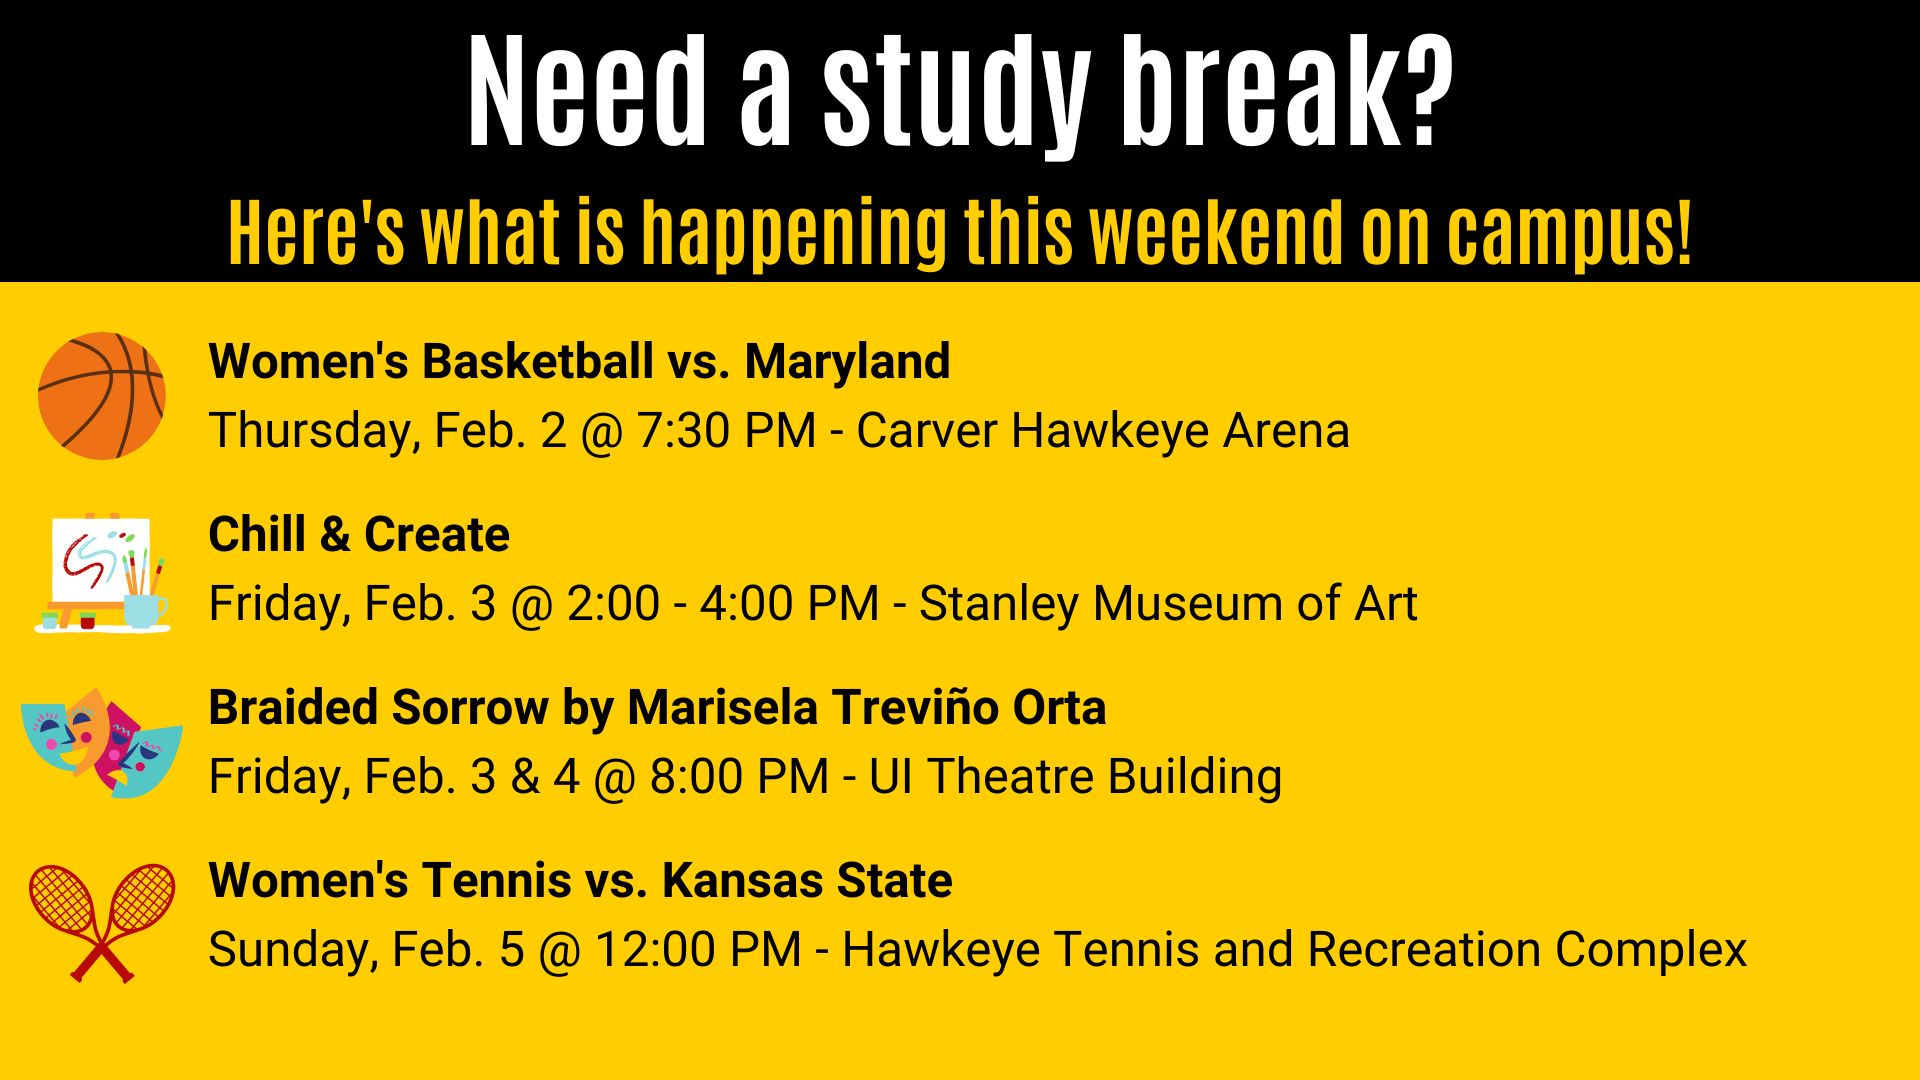 Need a study break? Here's what is happening this weekend on campus! Women's Basketball vs. Maryland Thursday, Feb. 2 @ 7:30 PM - Carver Hawkeye Arena. Chill & Create Friday, Feb. 3 @ 2:00 - 4:00 PM - Stanley Museum of Art. Braided Sorrow by Marisela Treviño Orta Friday, Feb. 3 & 4 @ 8:00 PM - UI Theatre Building. Women's Tennis vs. Kansas State Sunday, Feb. 5 @ 12:00 PM - Hawkeye Tennis and Recreation Complex